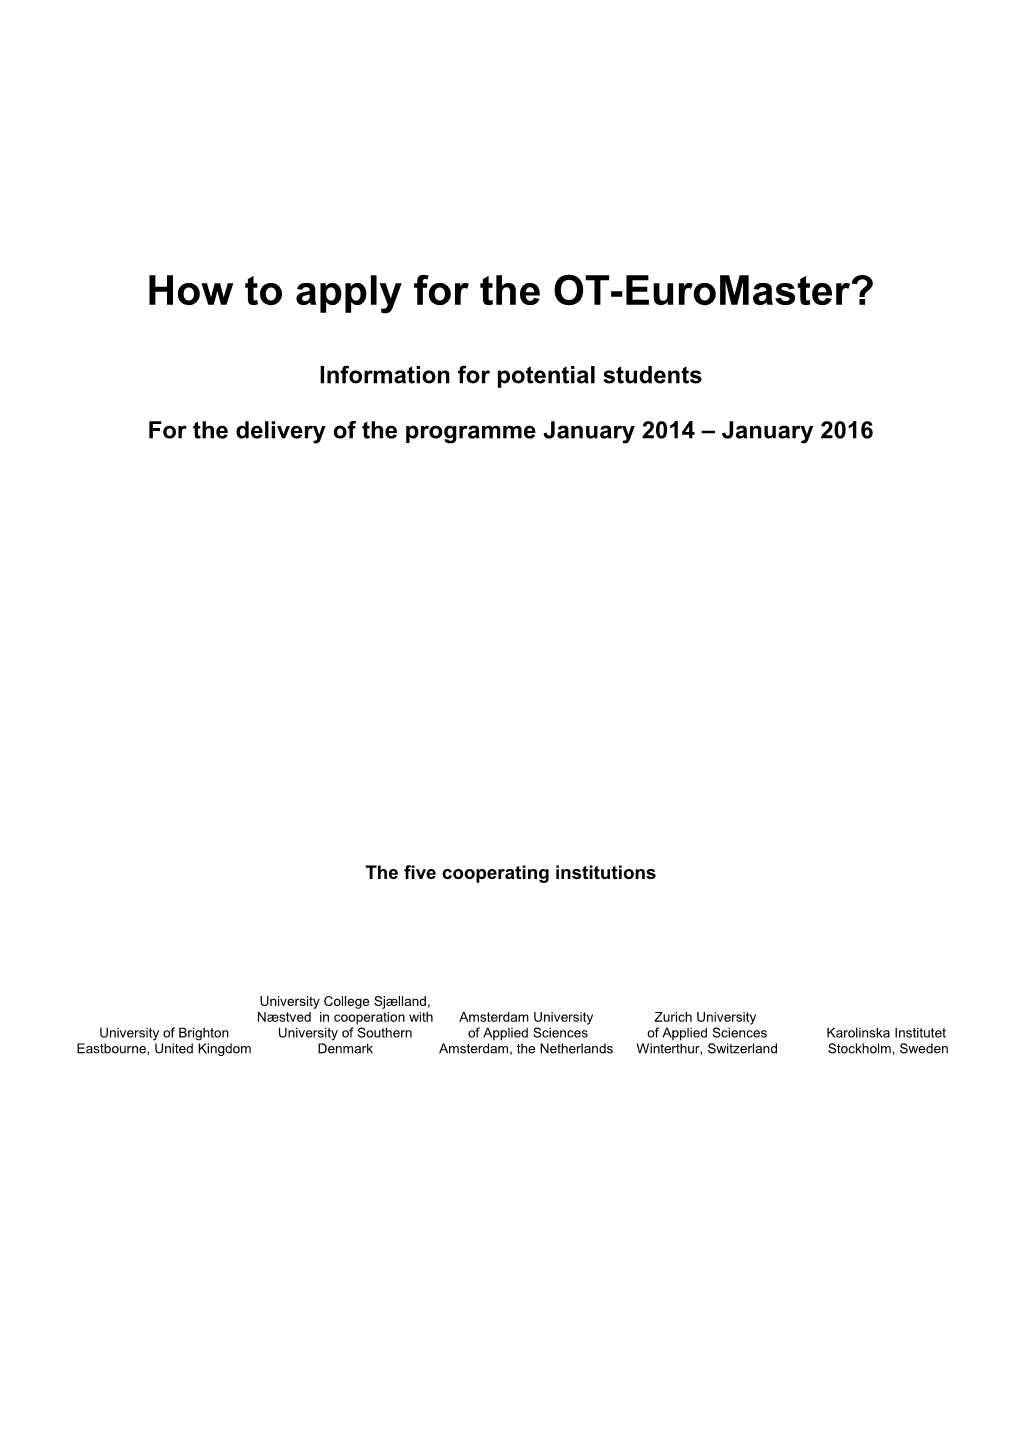 How to Apply for the OT-Euromaster?